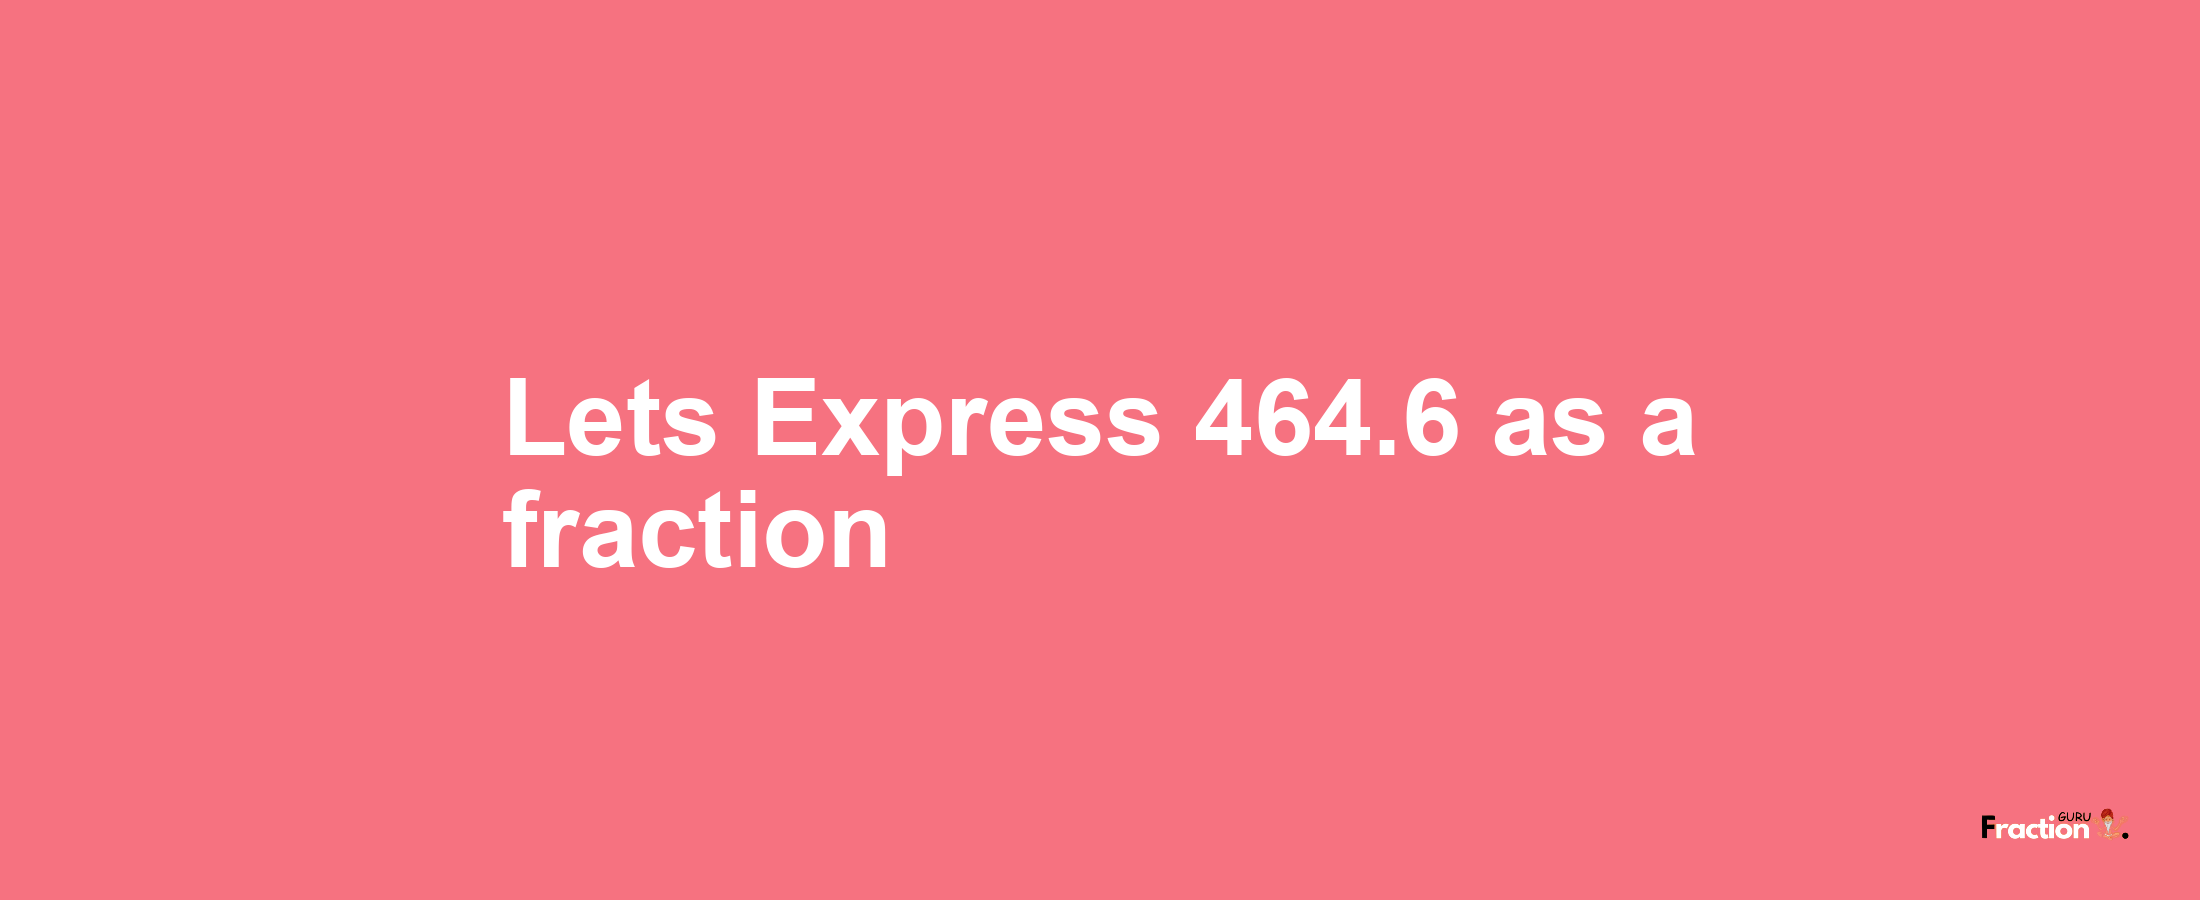 Lets Express 464.6 as afraction